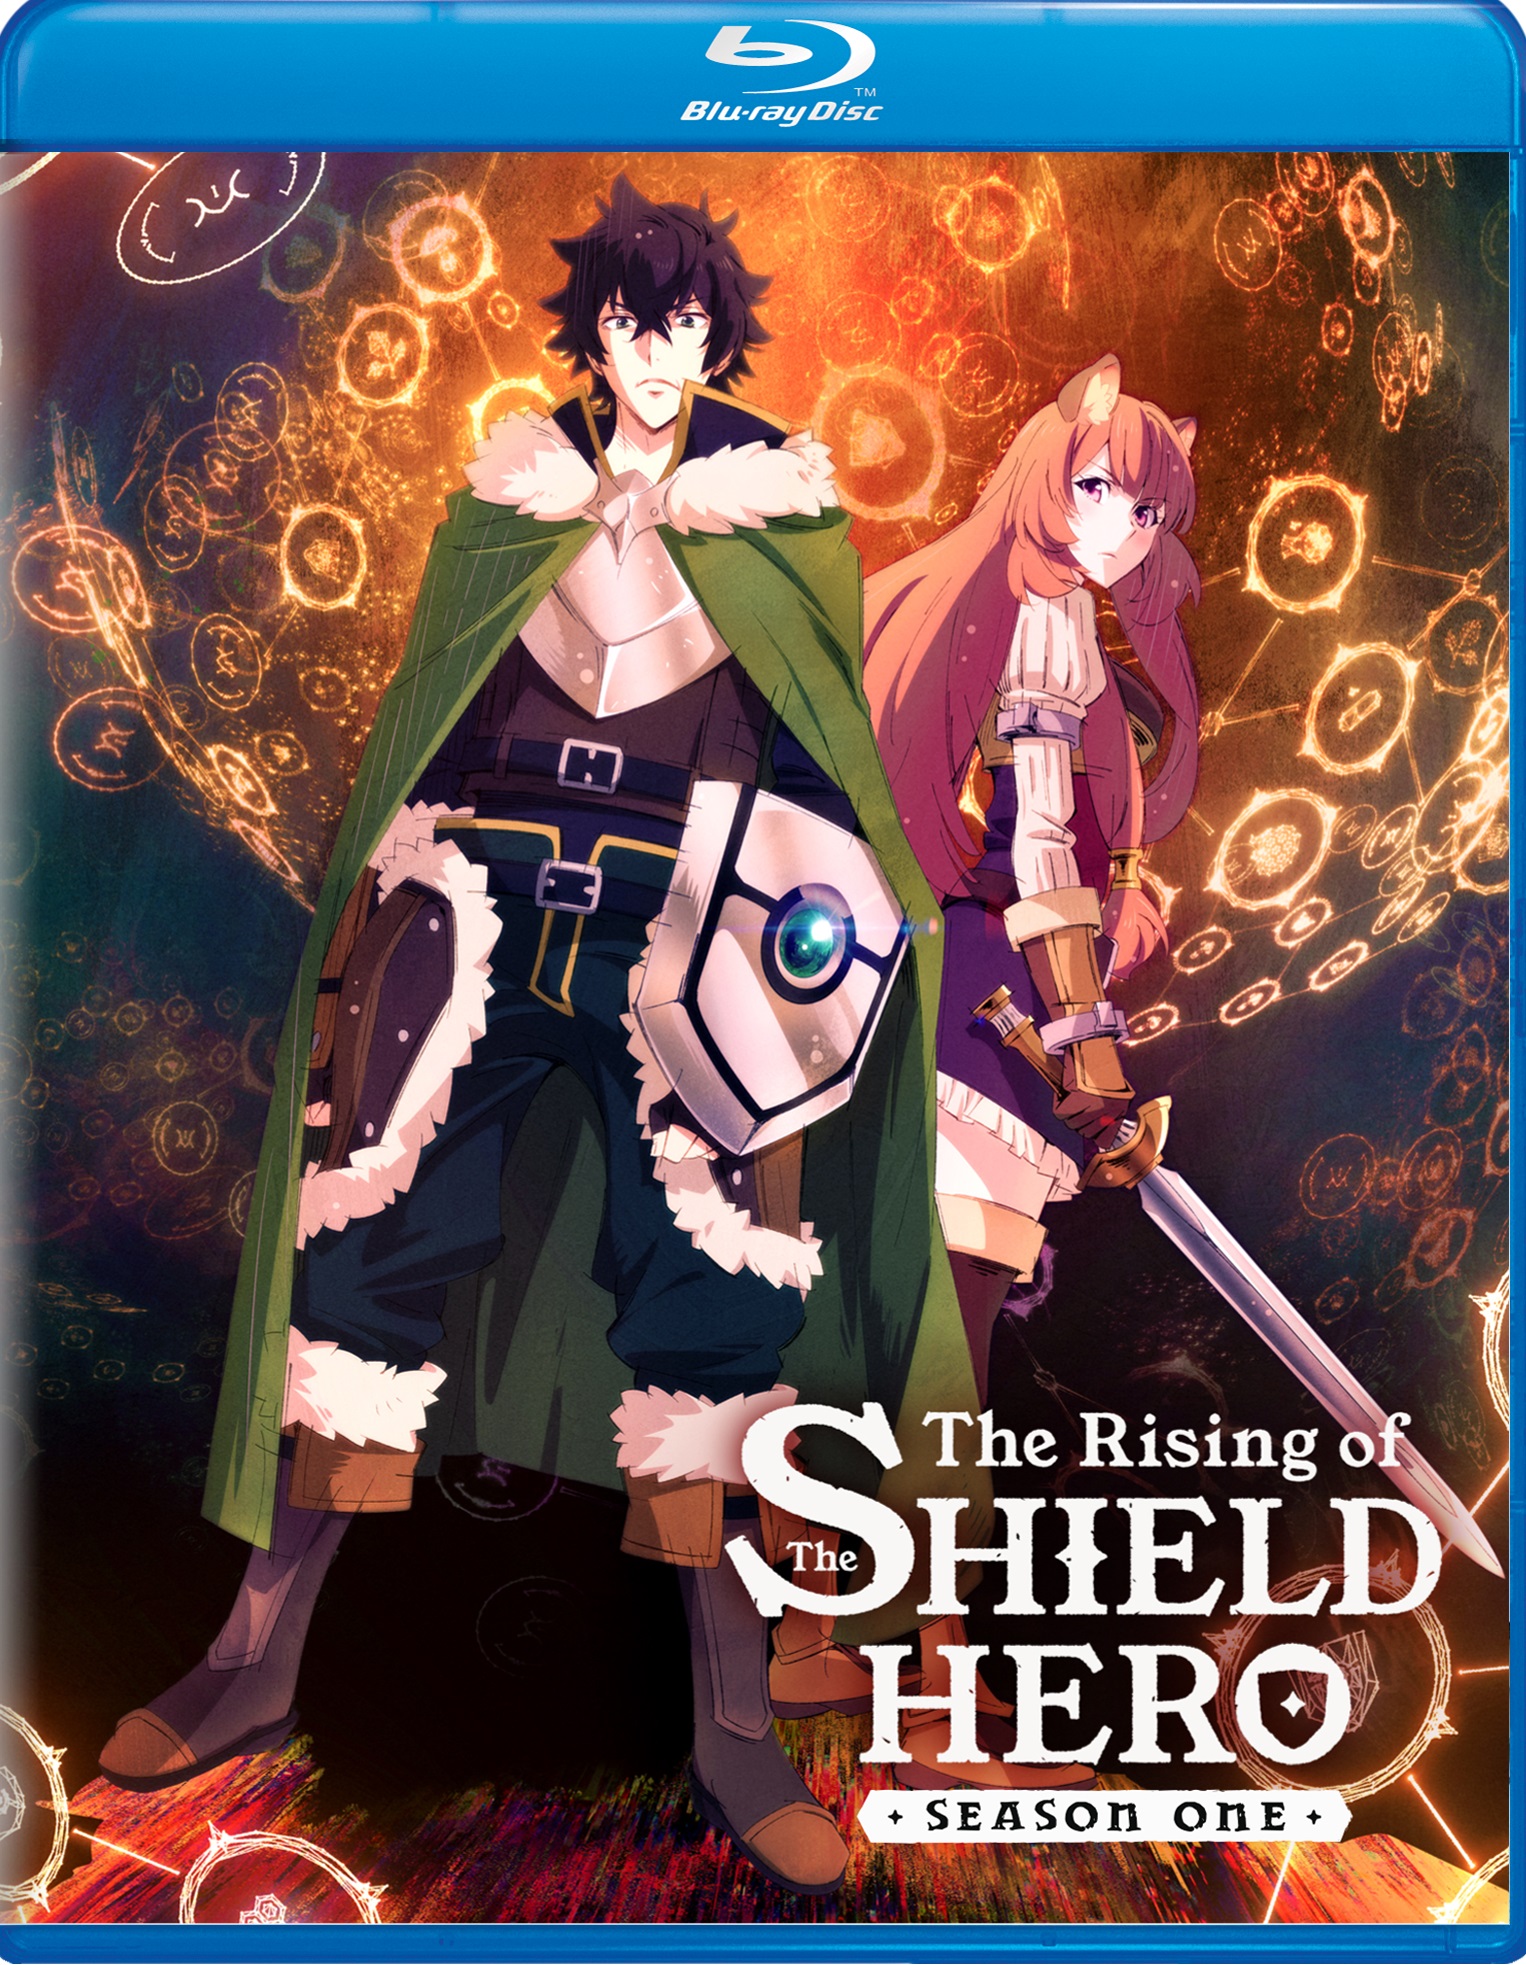 The rise of the shield hero